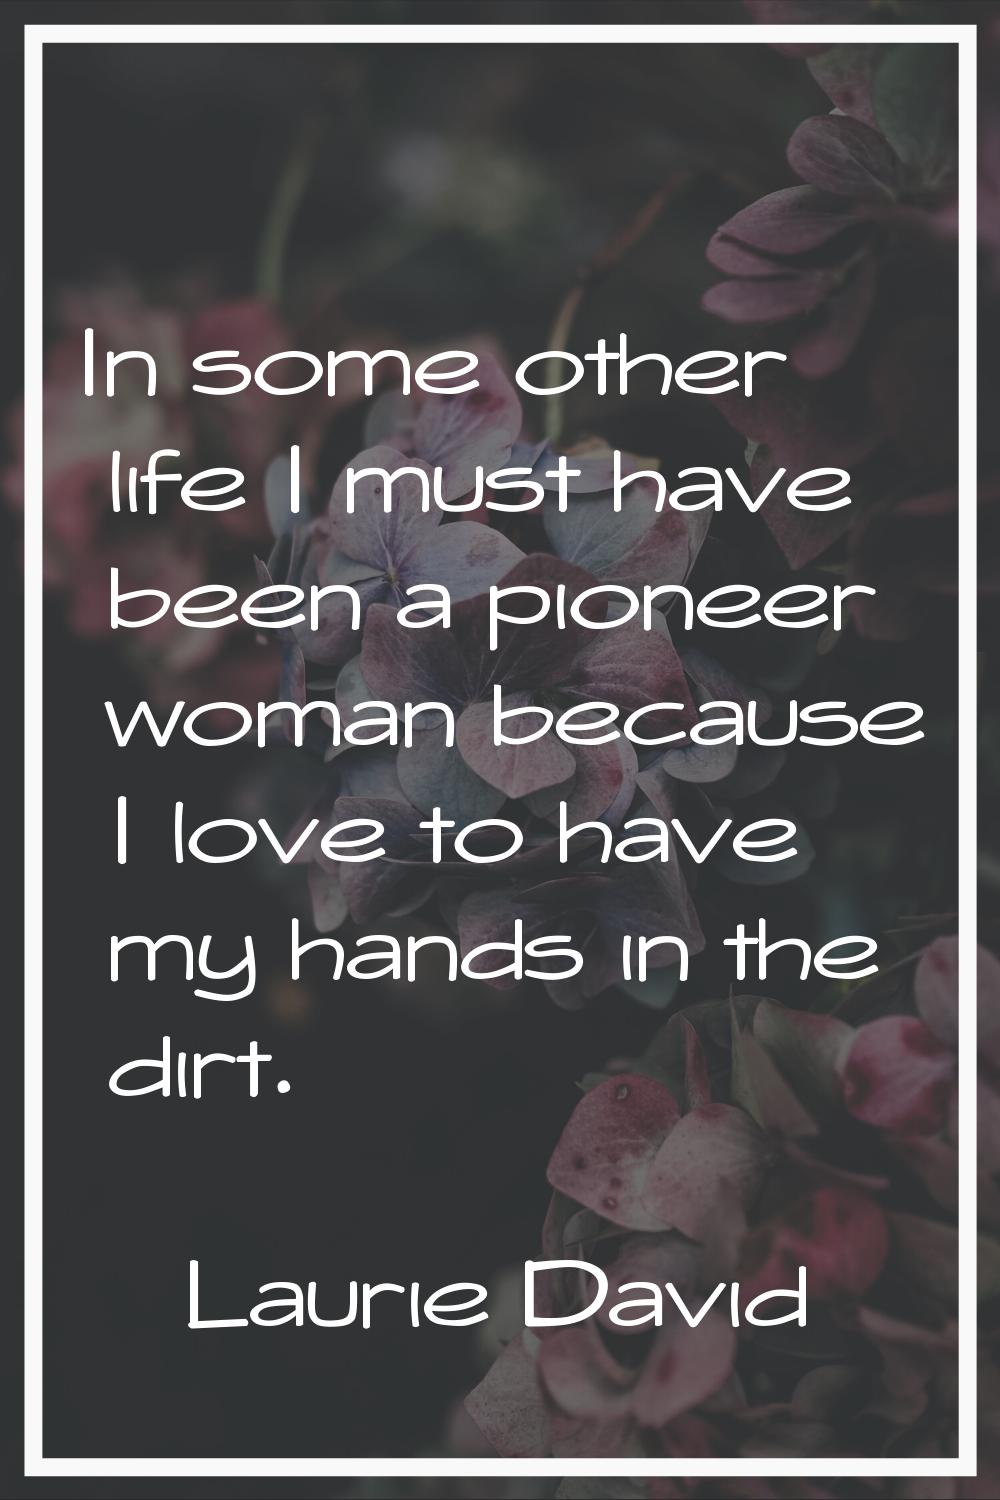 In some other life I must have been a pioneer woman because I love to have my hands in the dirt.